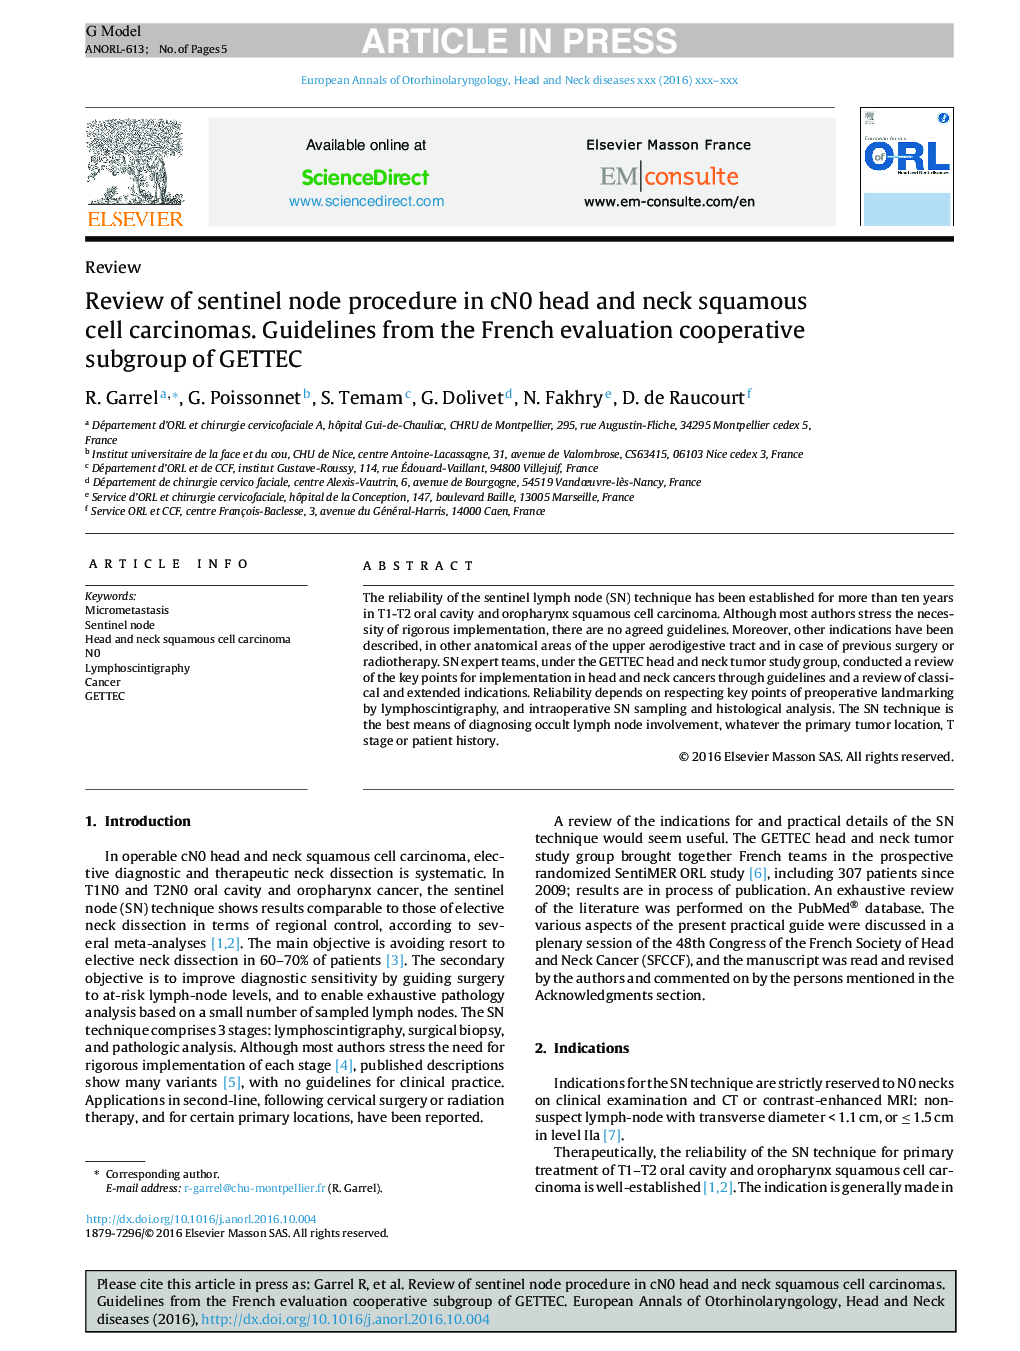 Review of sentinel node procedure in cN0 head and neck squamous cell carcinomas. Guidelines from the French evaluation cooperative subgroup of GETTEC